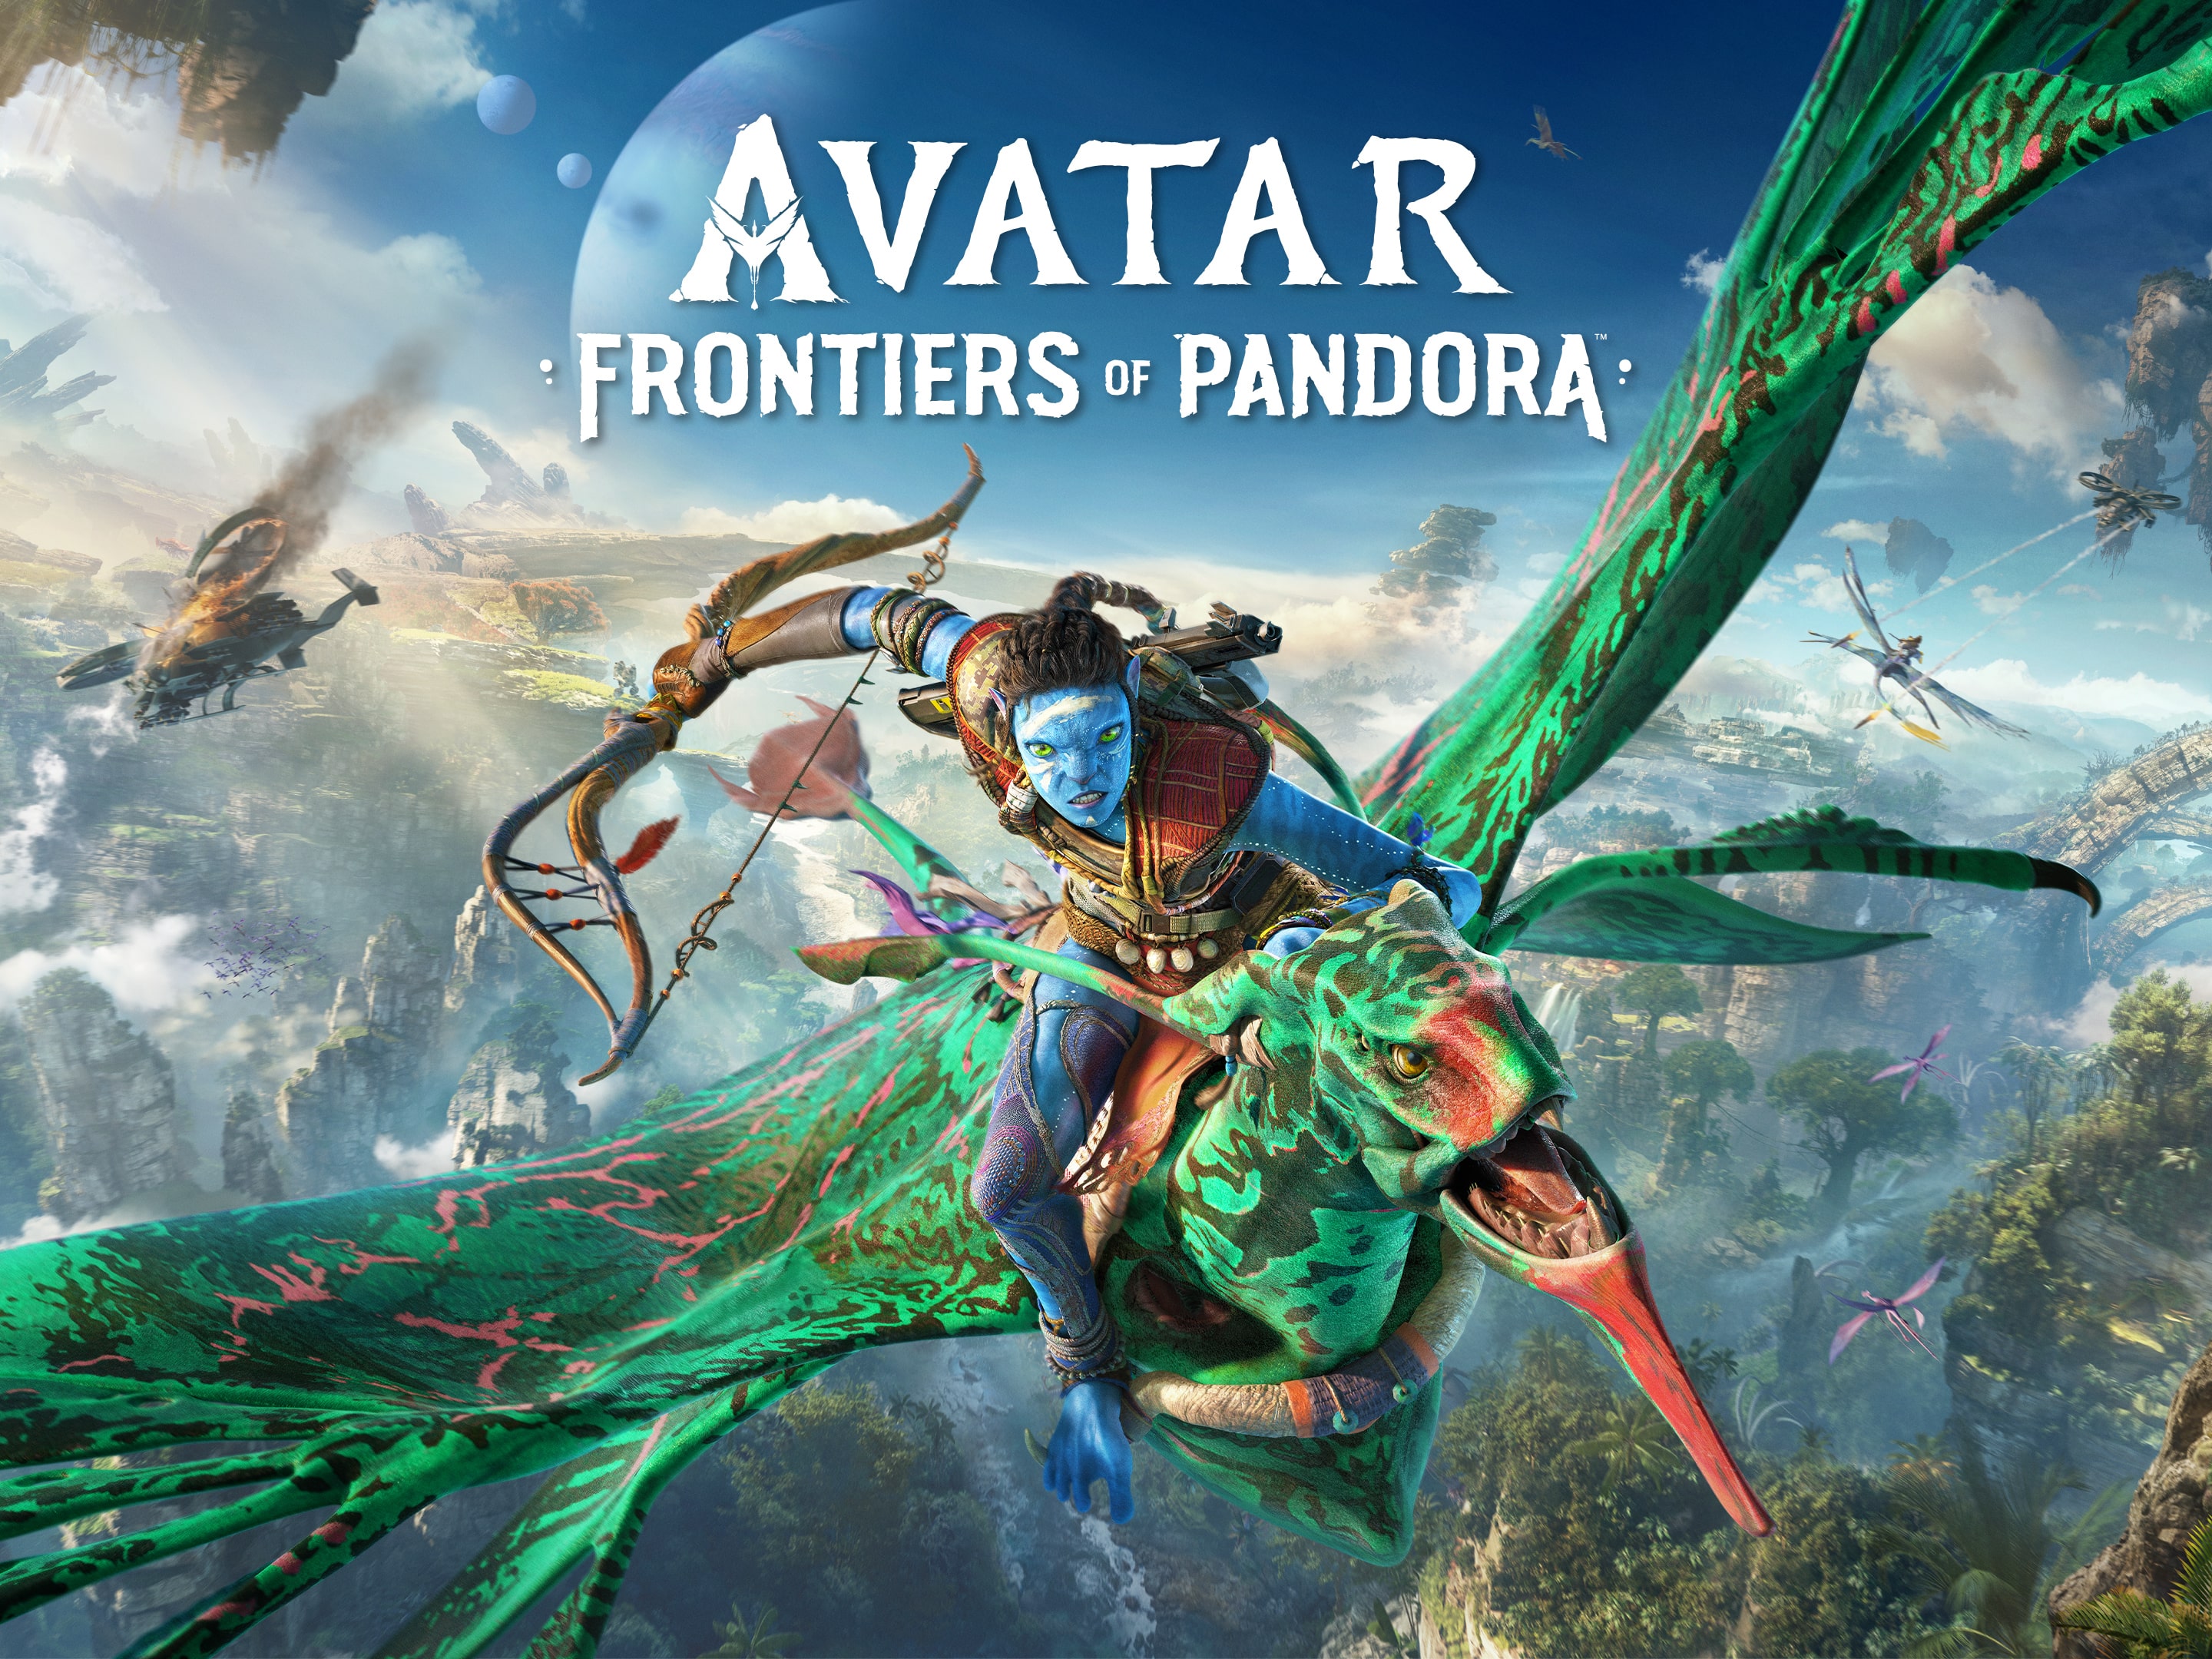 PlayStation Europe on X: Avatar: Frontiers of Pandora soars to